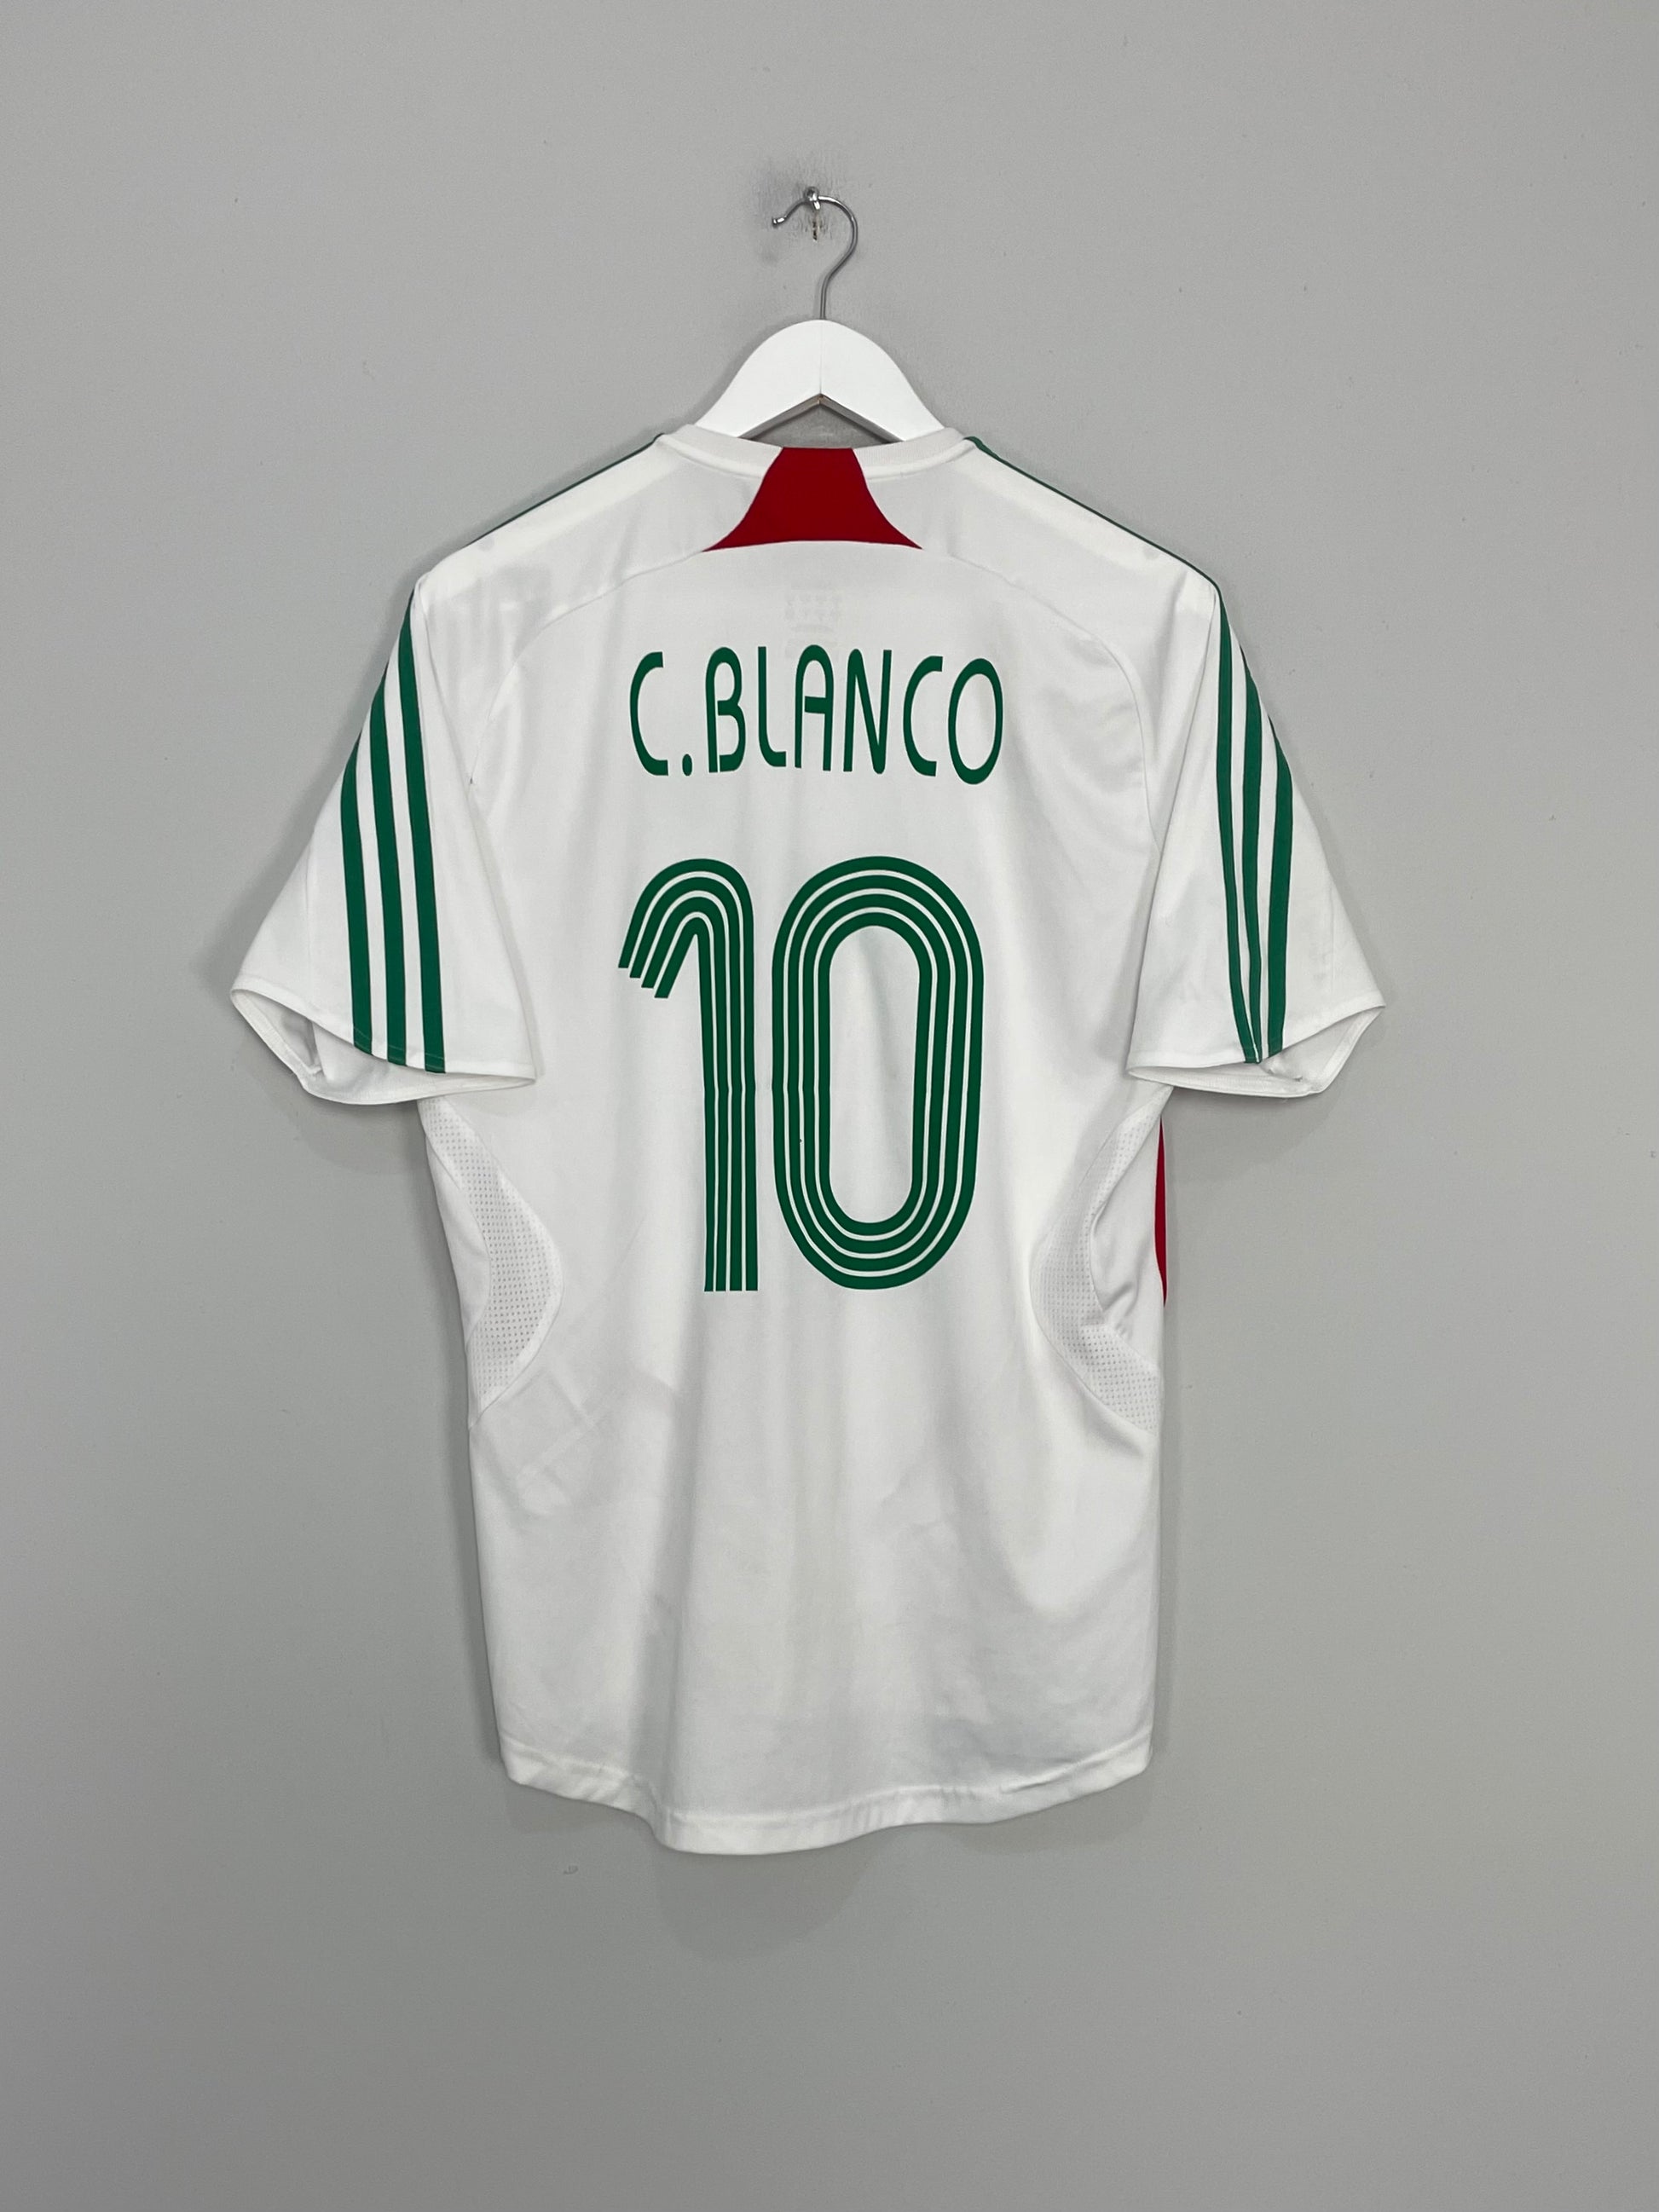 Image of the Mexico Blanco shirt from the 2007/08 season